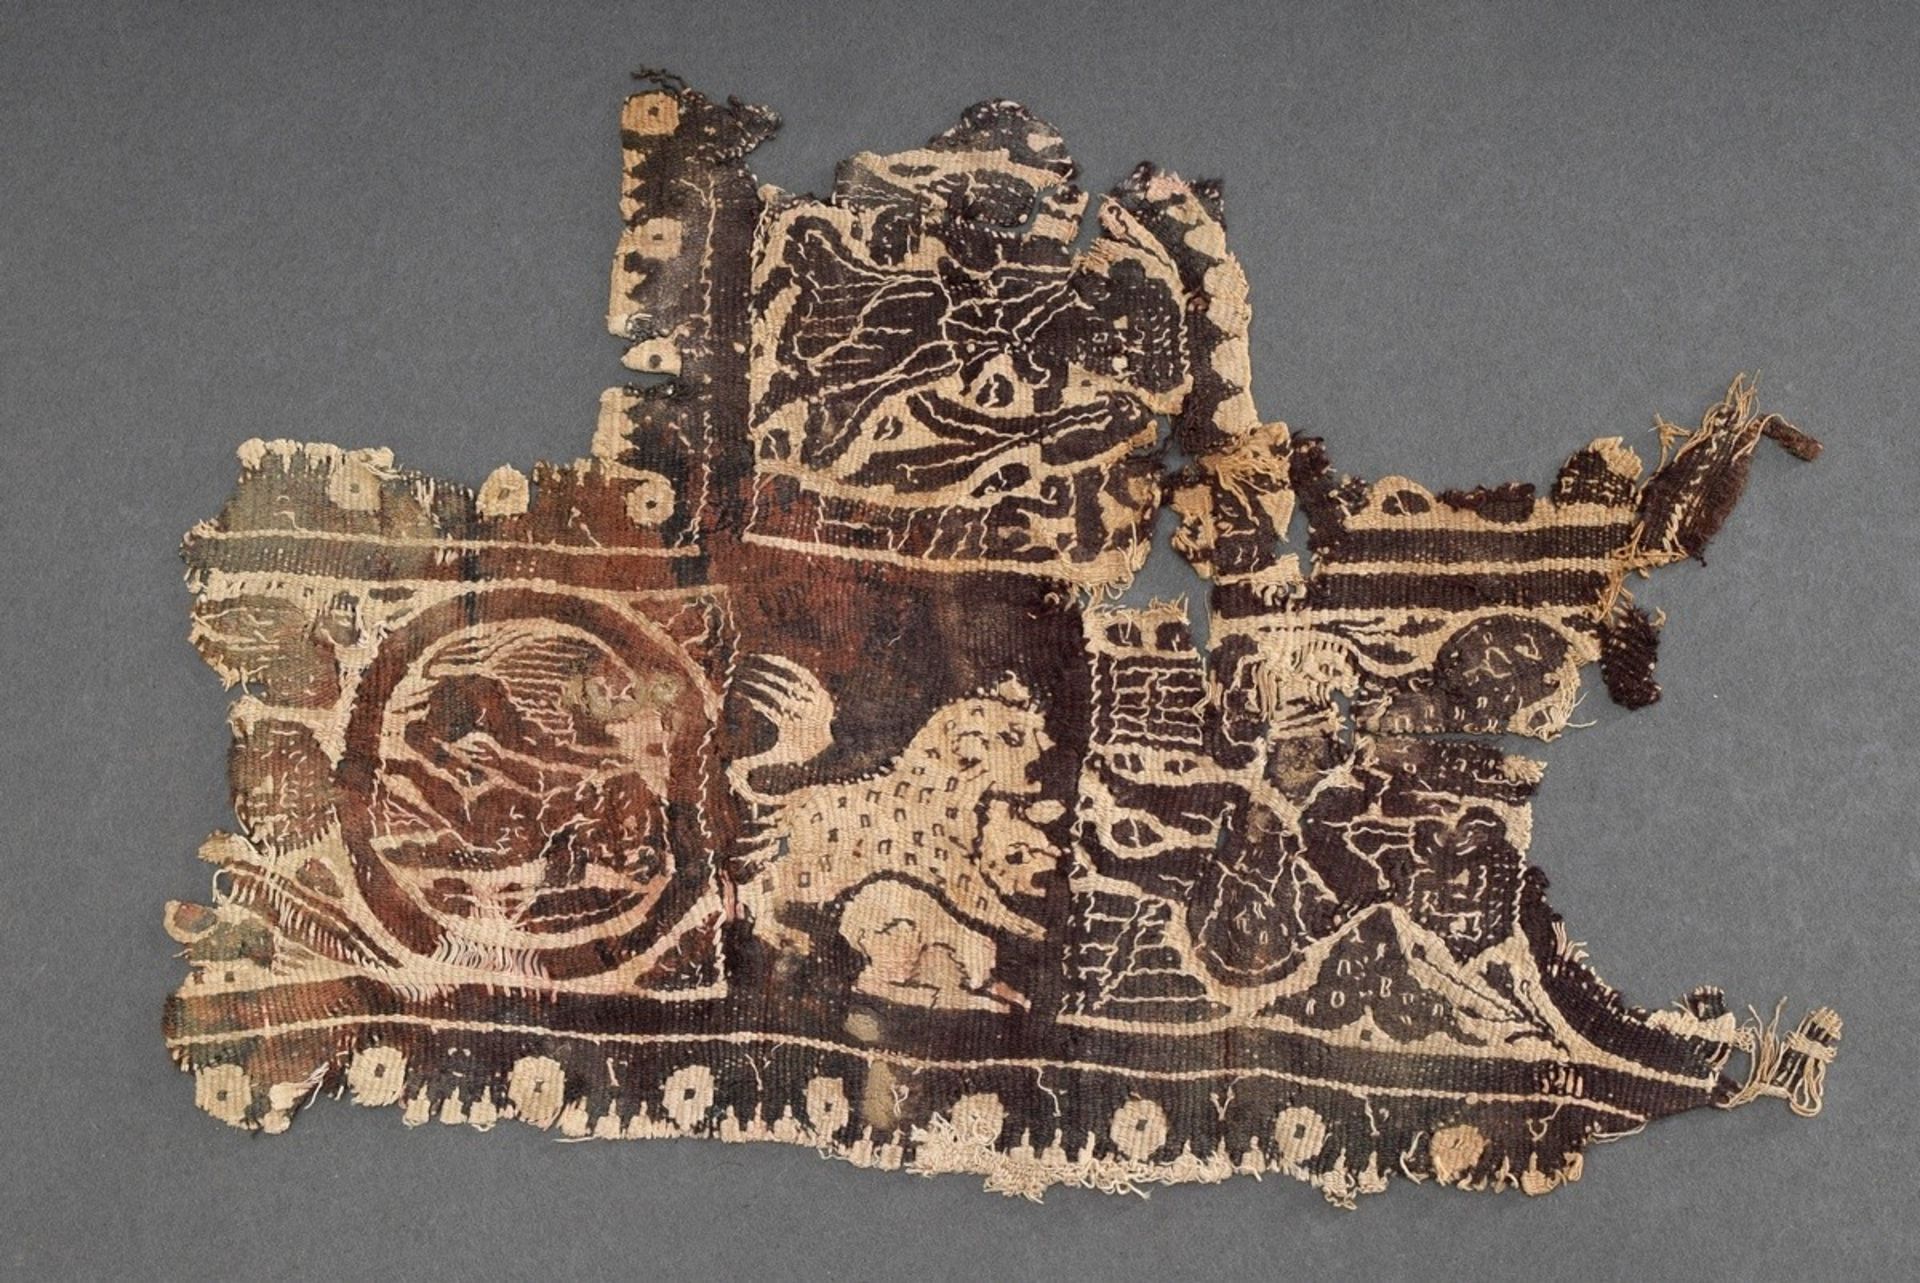 Late antique tunic textile fragment with figural depictions "Panther beats hare" and "Maenads are b